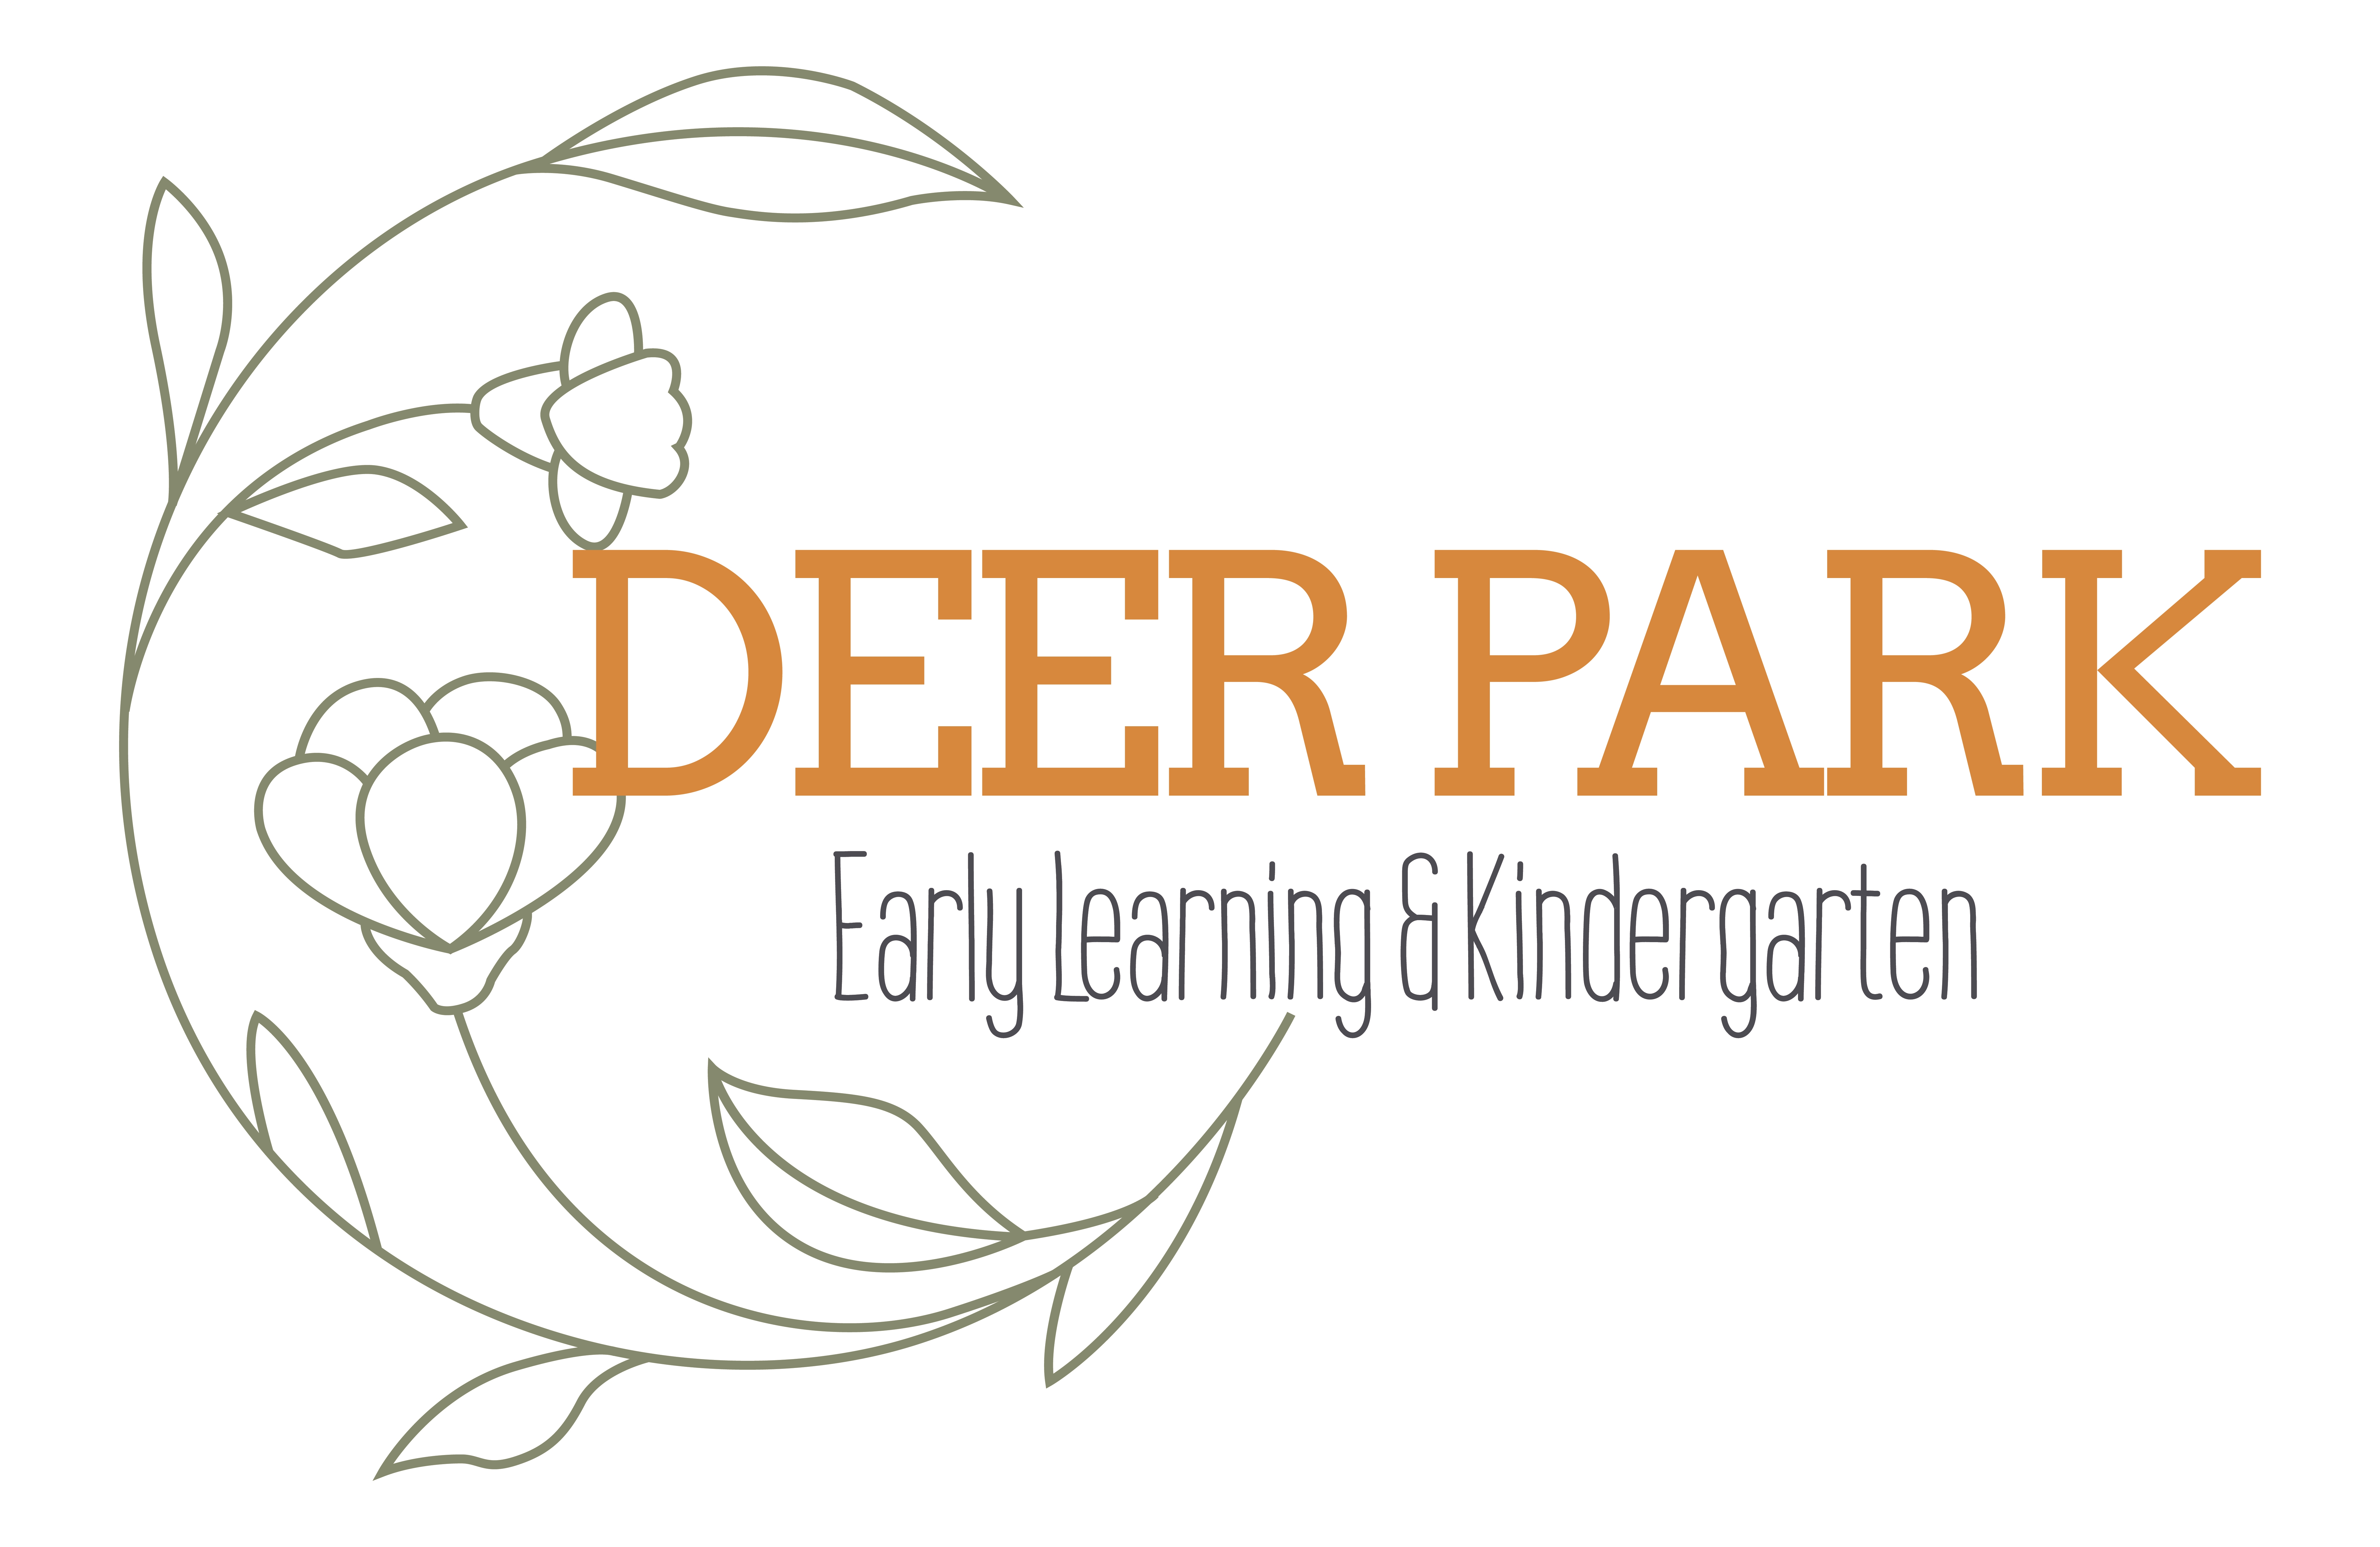 Deer Park Early Learning and Kindergarten